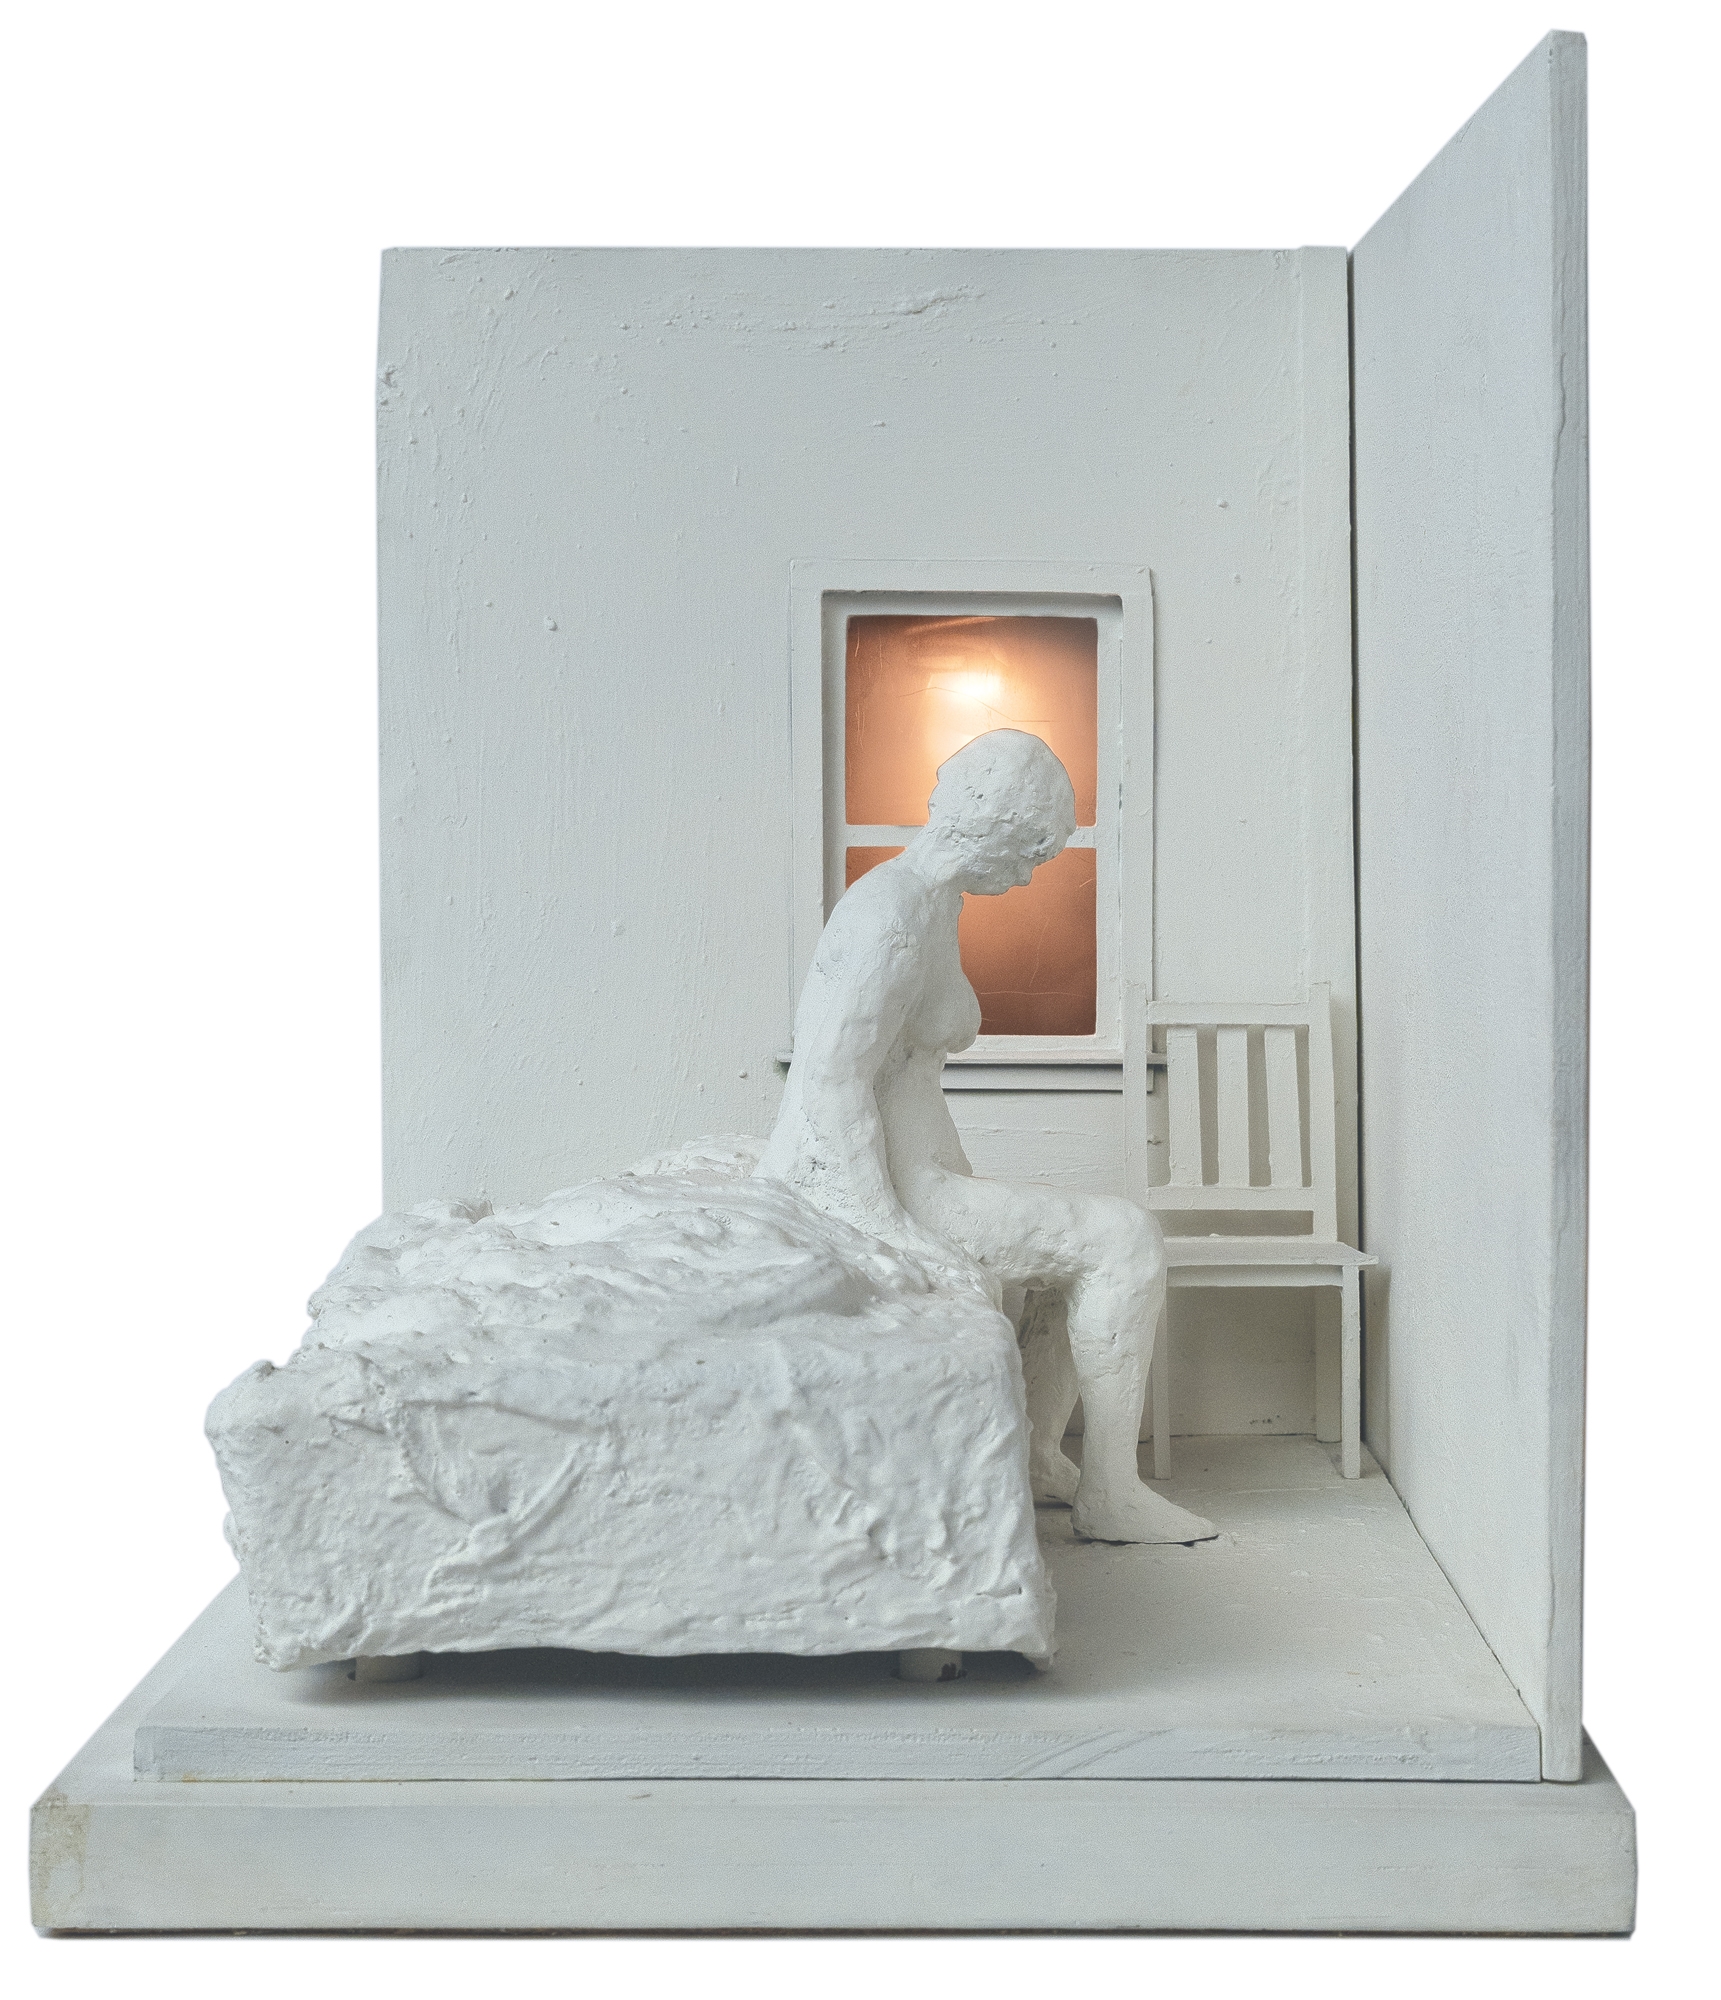 Woman Sitting on Bed by George Segal, 1996